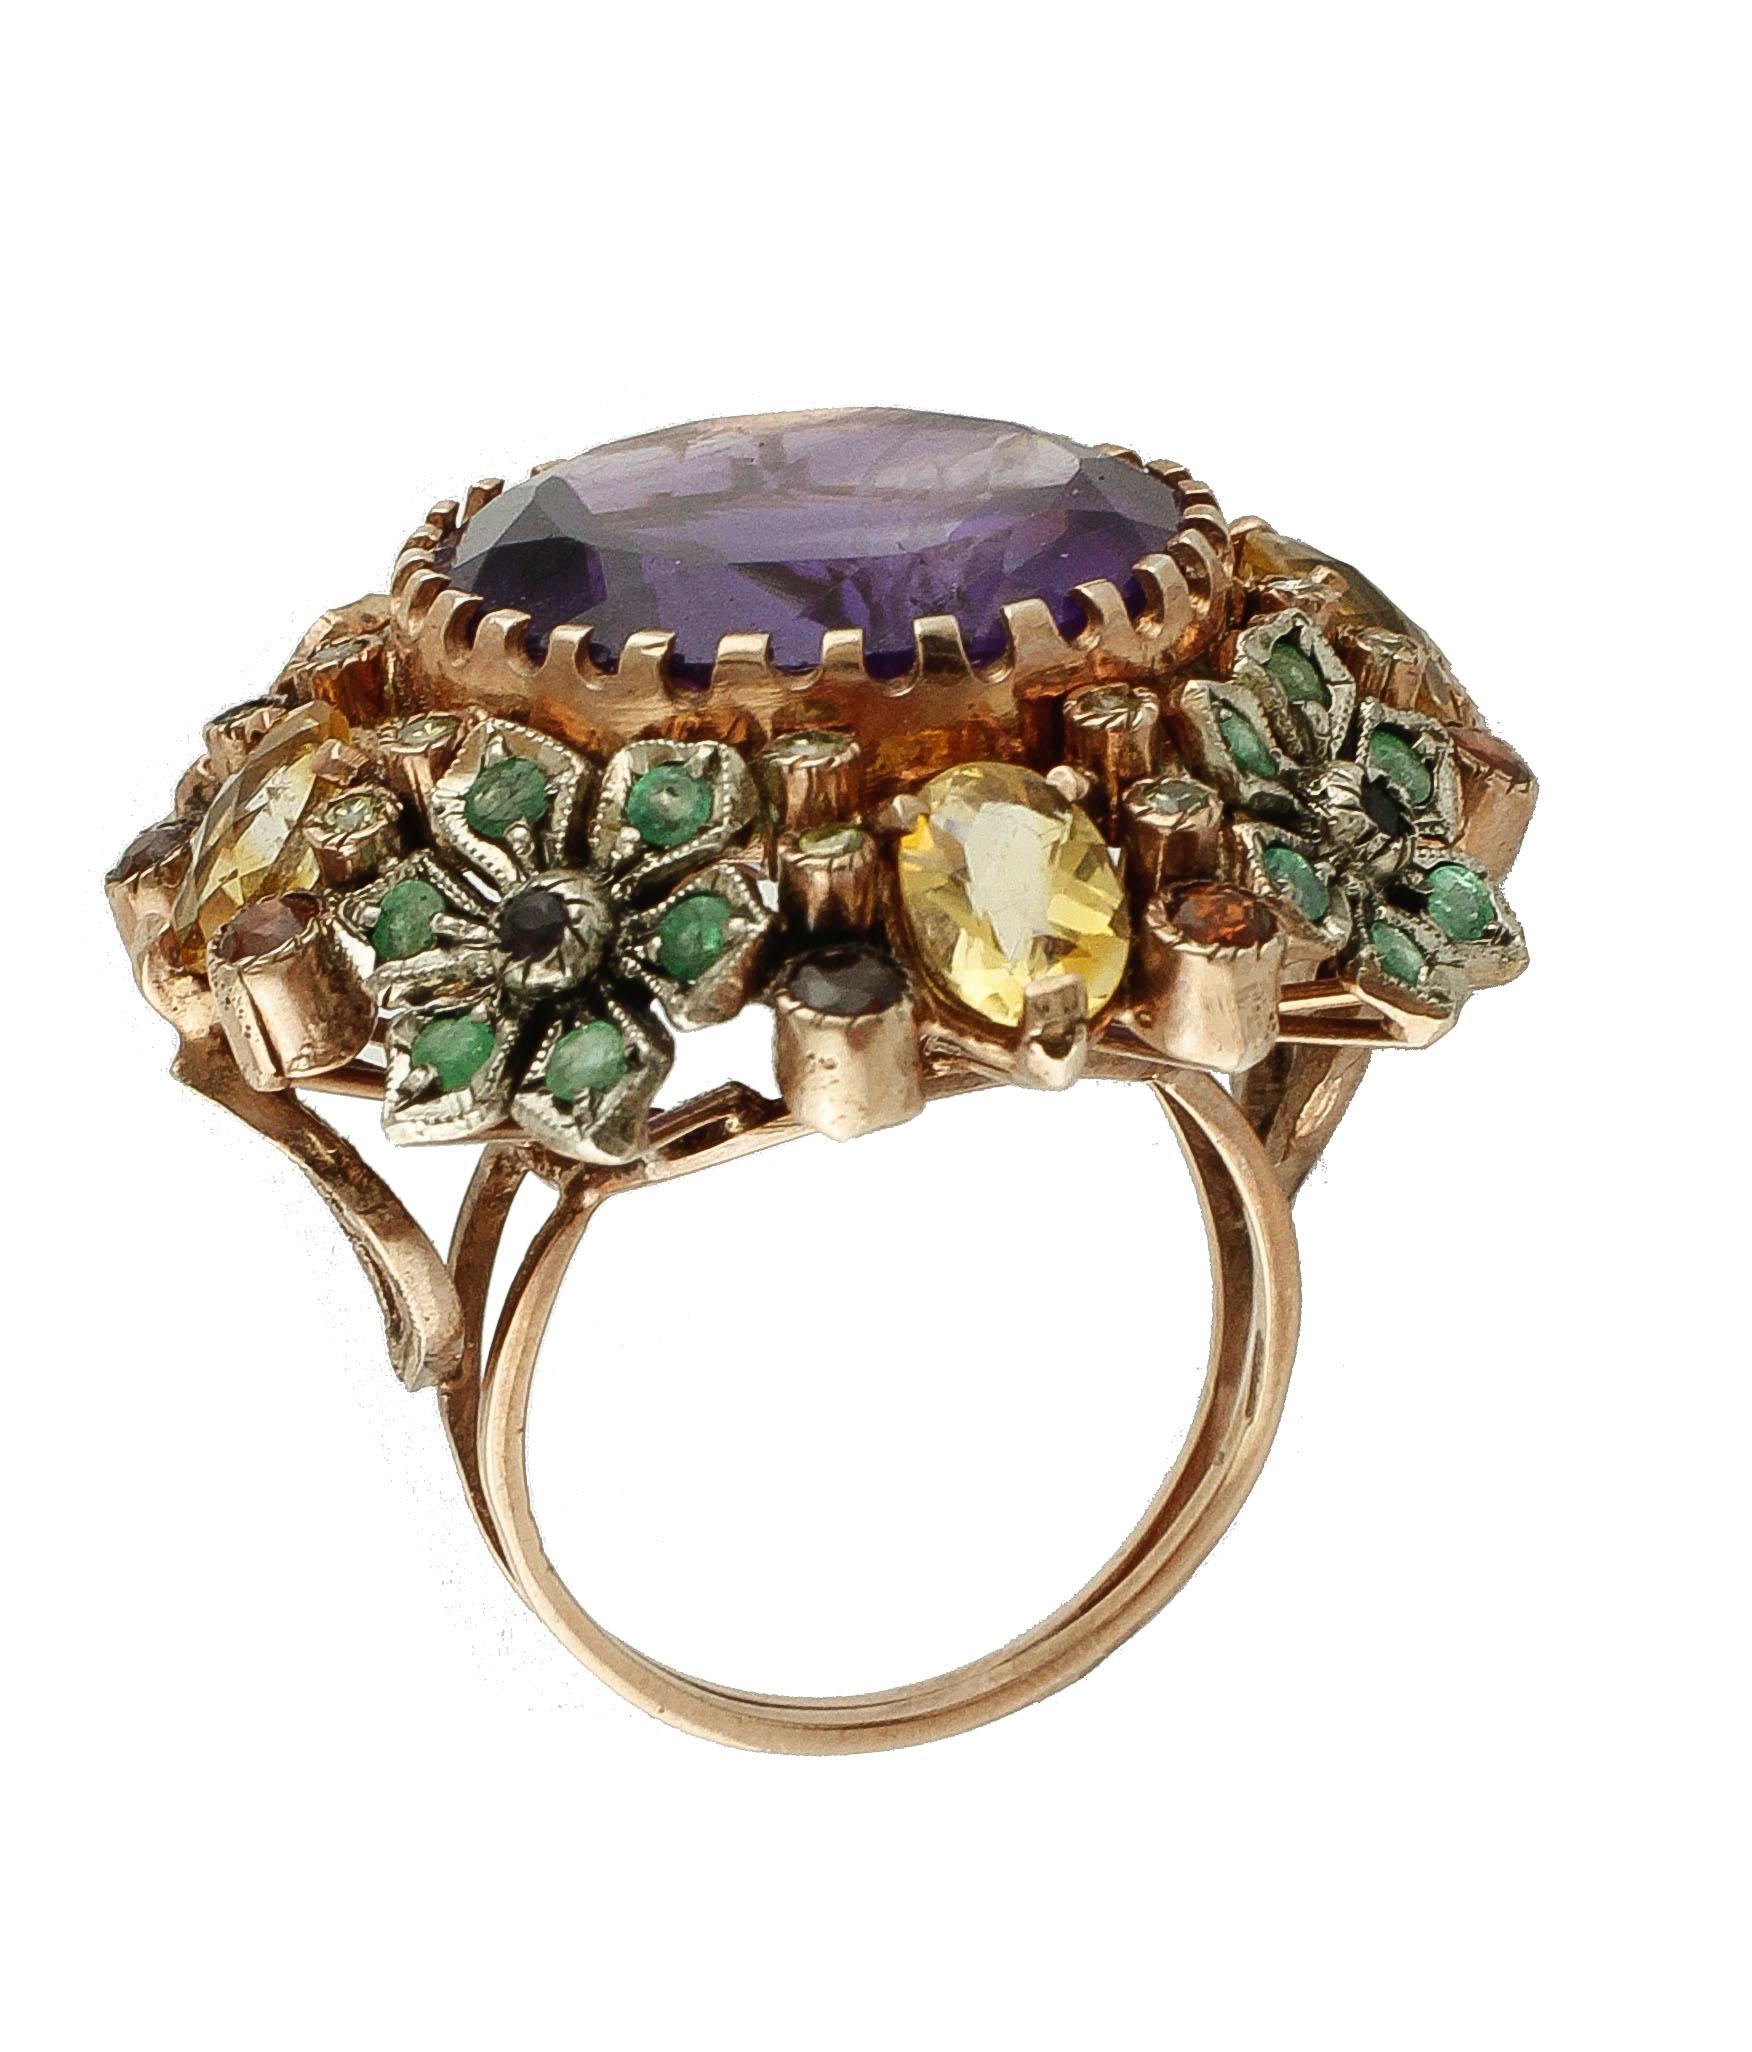 Diamonds Emeralds Amethysts Topazes Garnets Rose Gold and Silver Cocktail Ring In Excellent Condition In Marcianise, Marcianise (CE)